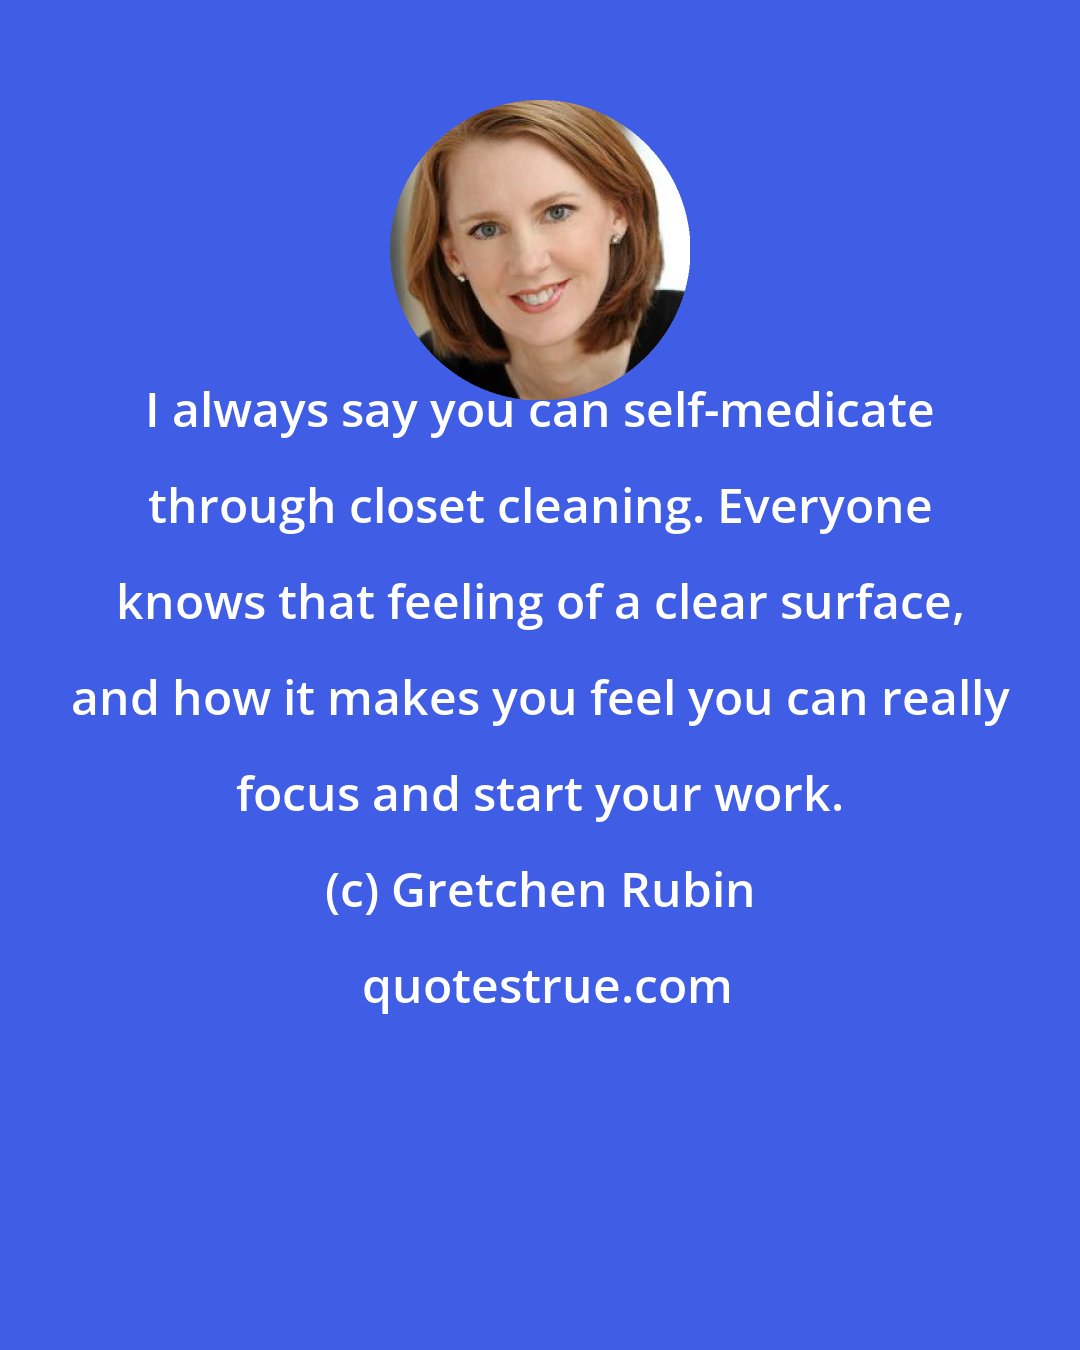 Gretchen Rubin: I always say you can self-medicate through closet cleaning. Everyone knows that feeling of a clear surface, and how it makes you feel you can really focus and start your work.